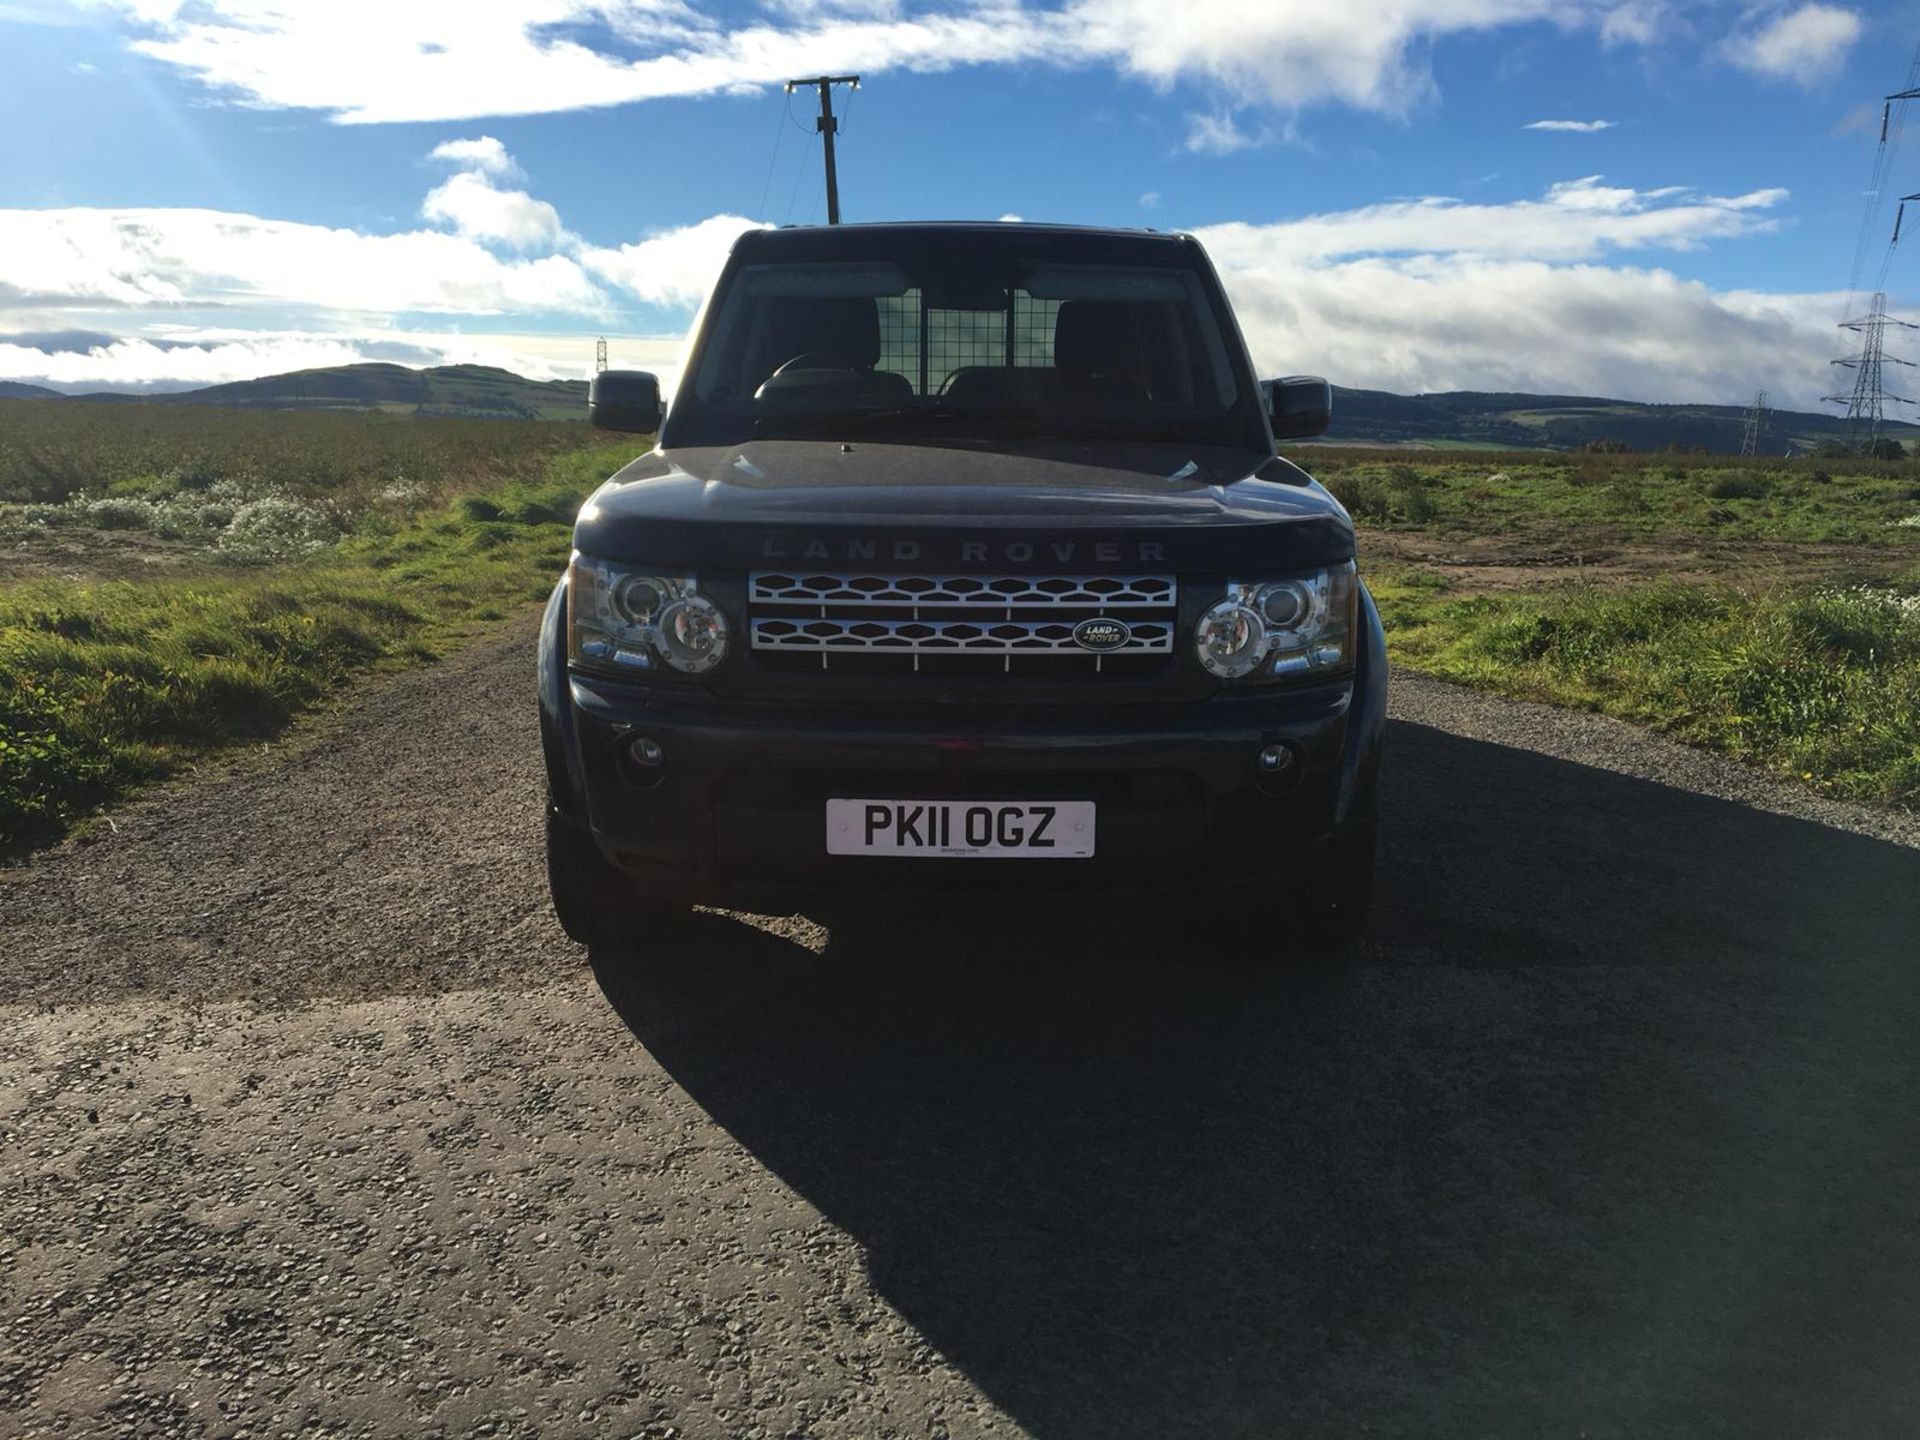 2011/11 REG LAND ROVER DISCOVERY SDV6 AUTOMATIC 245 COMMERCIAL DIESEL 4X4, SHOWING 1 FORMER KEEPER - Image 2 of 9